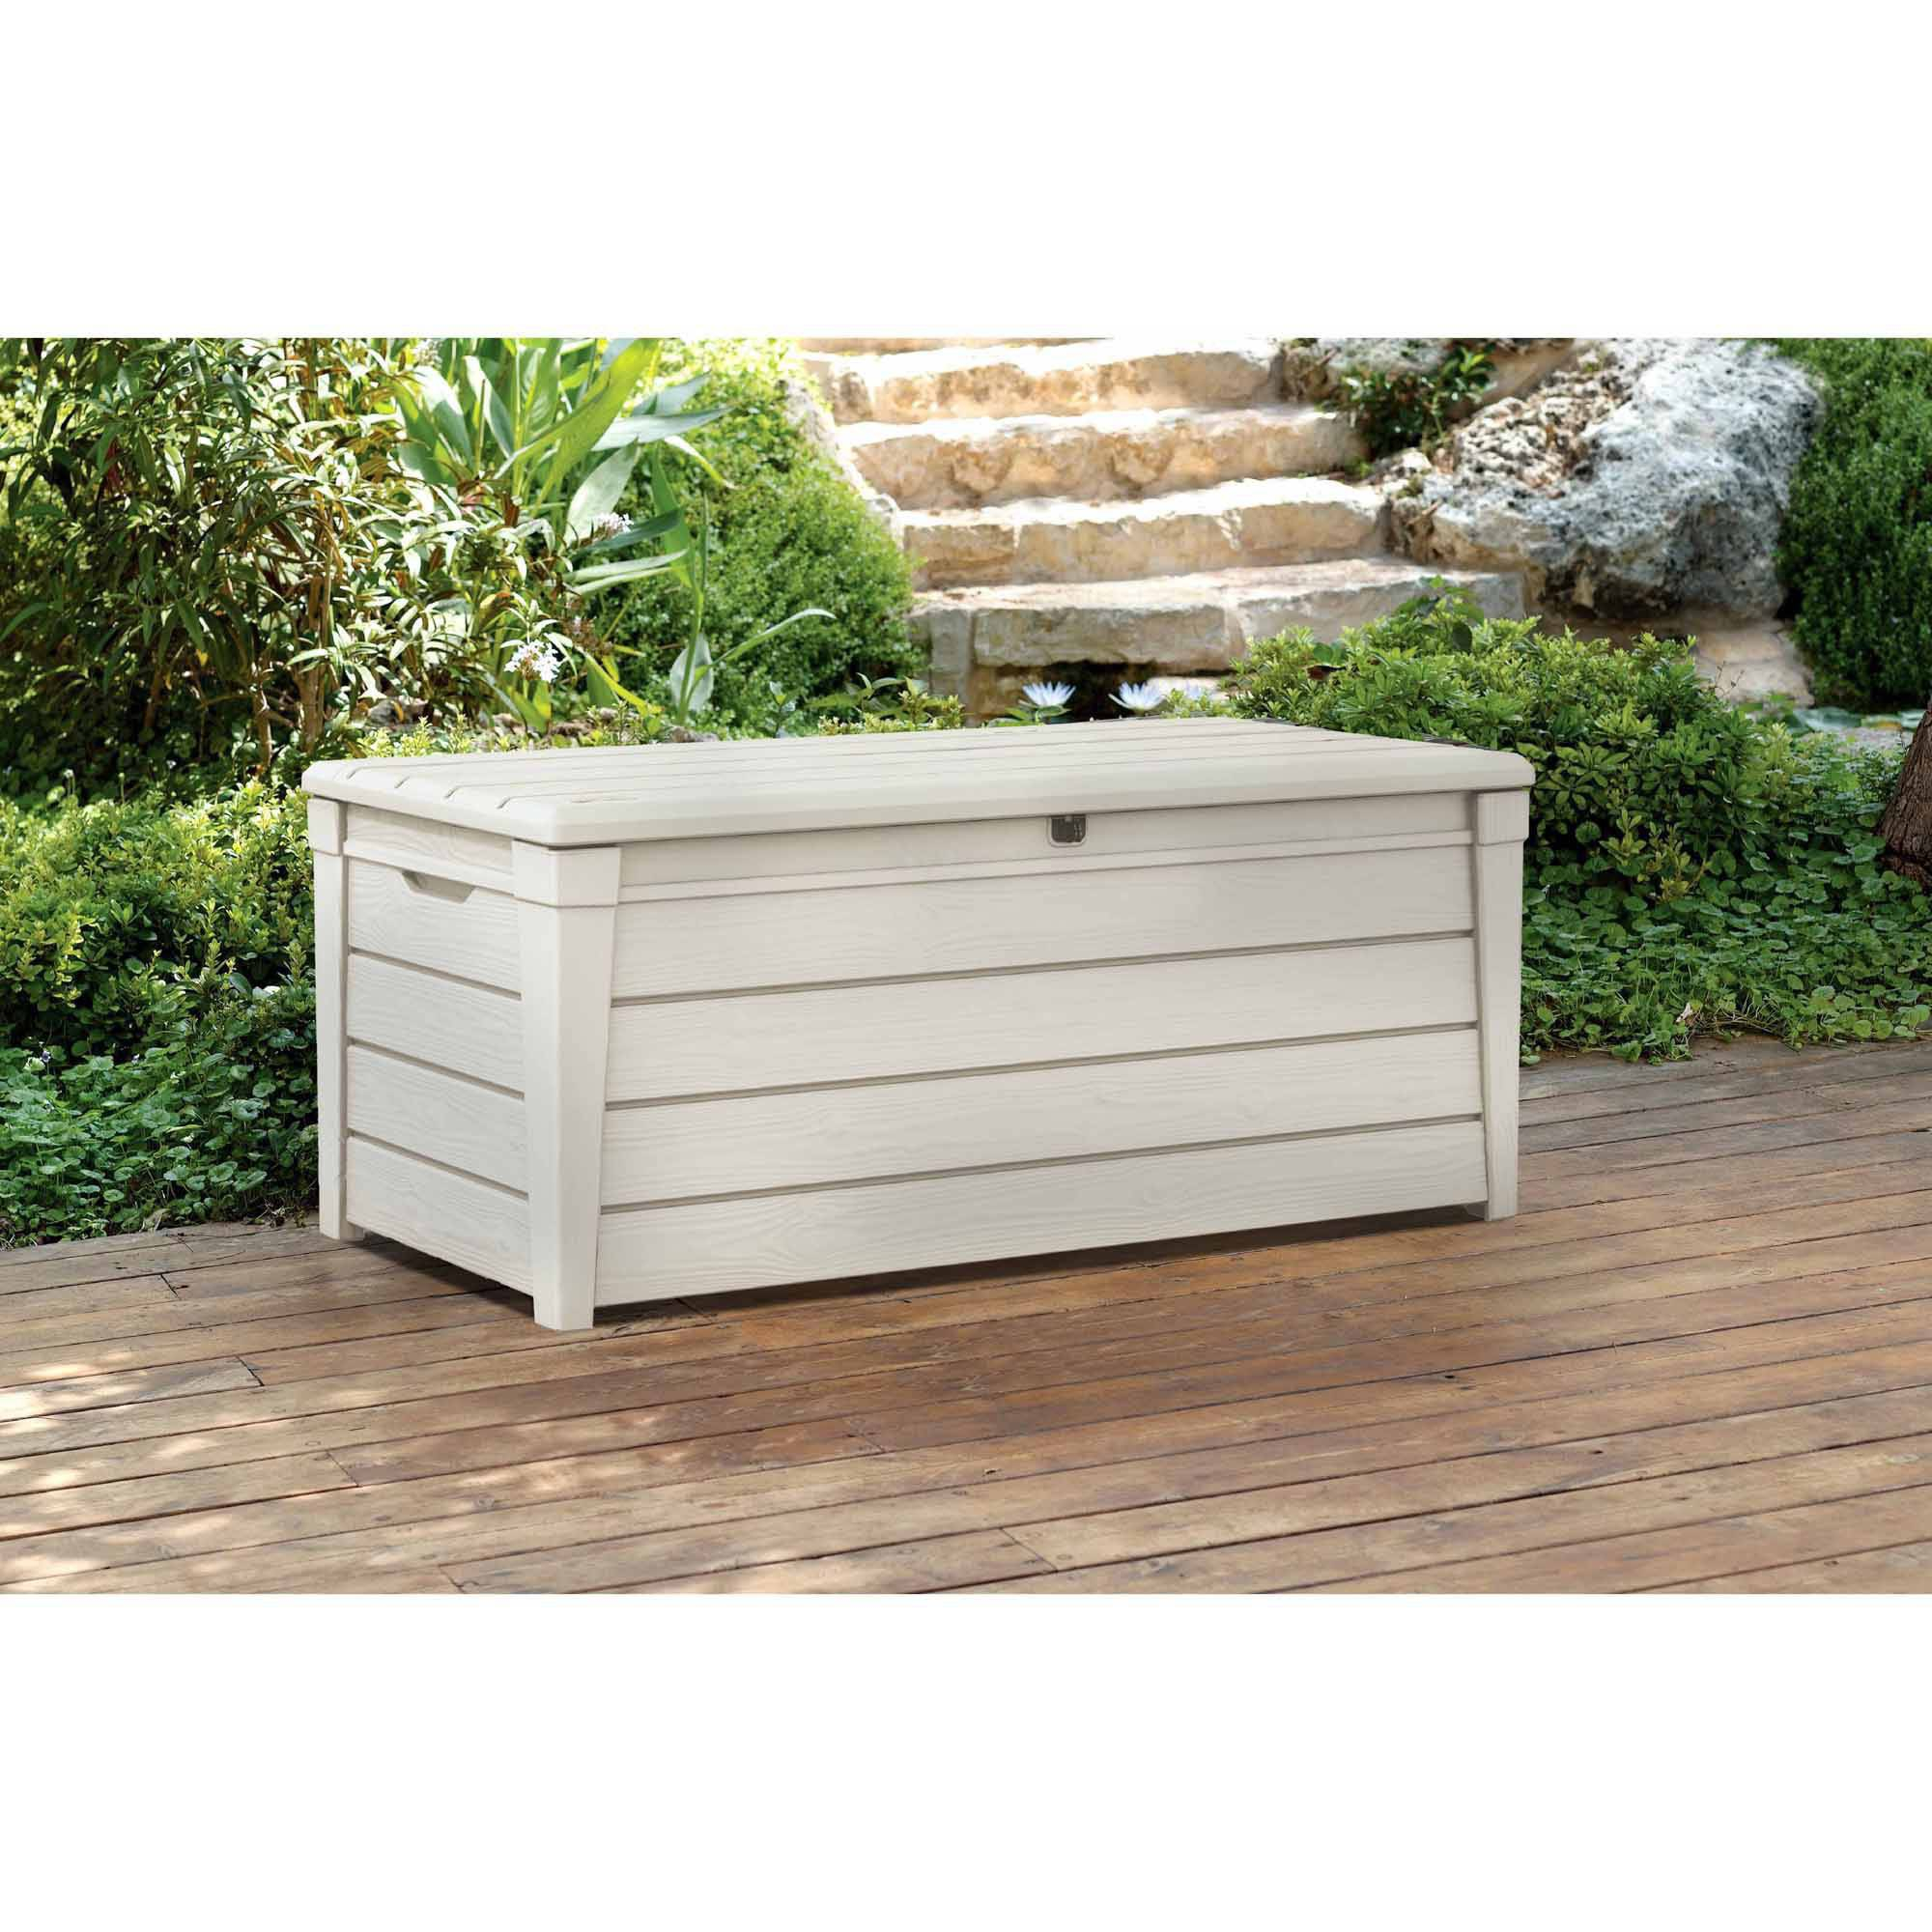 Keter Brightwood Outdoor Plastic Deck Box All Weather Resin Storage for size 2000 X 2000